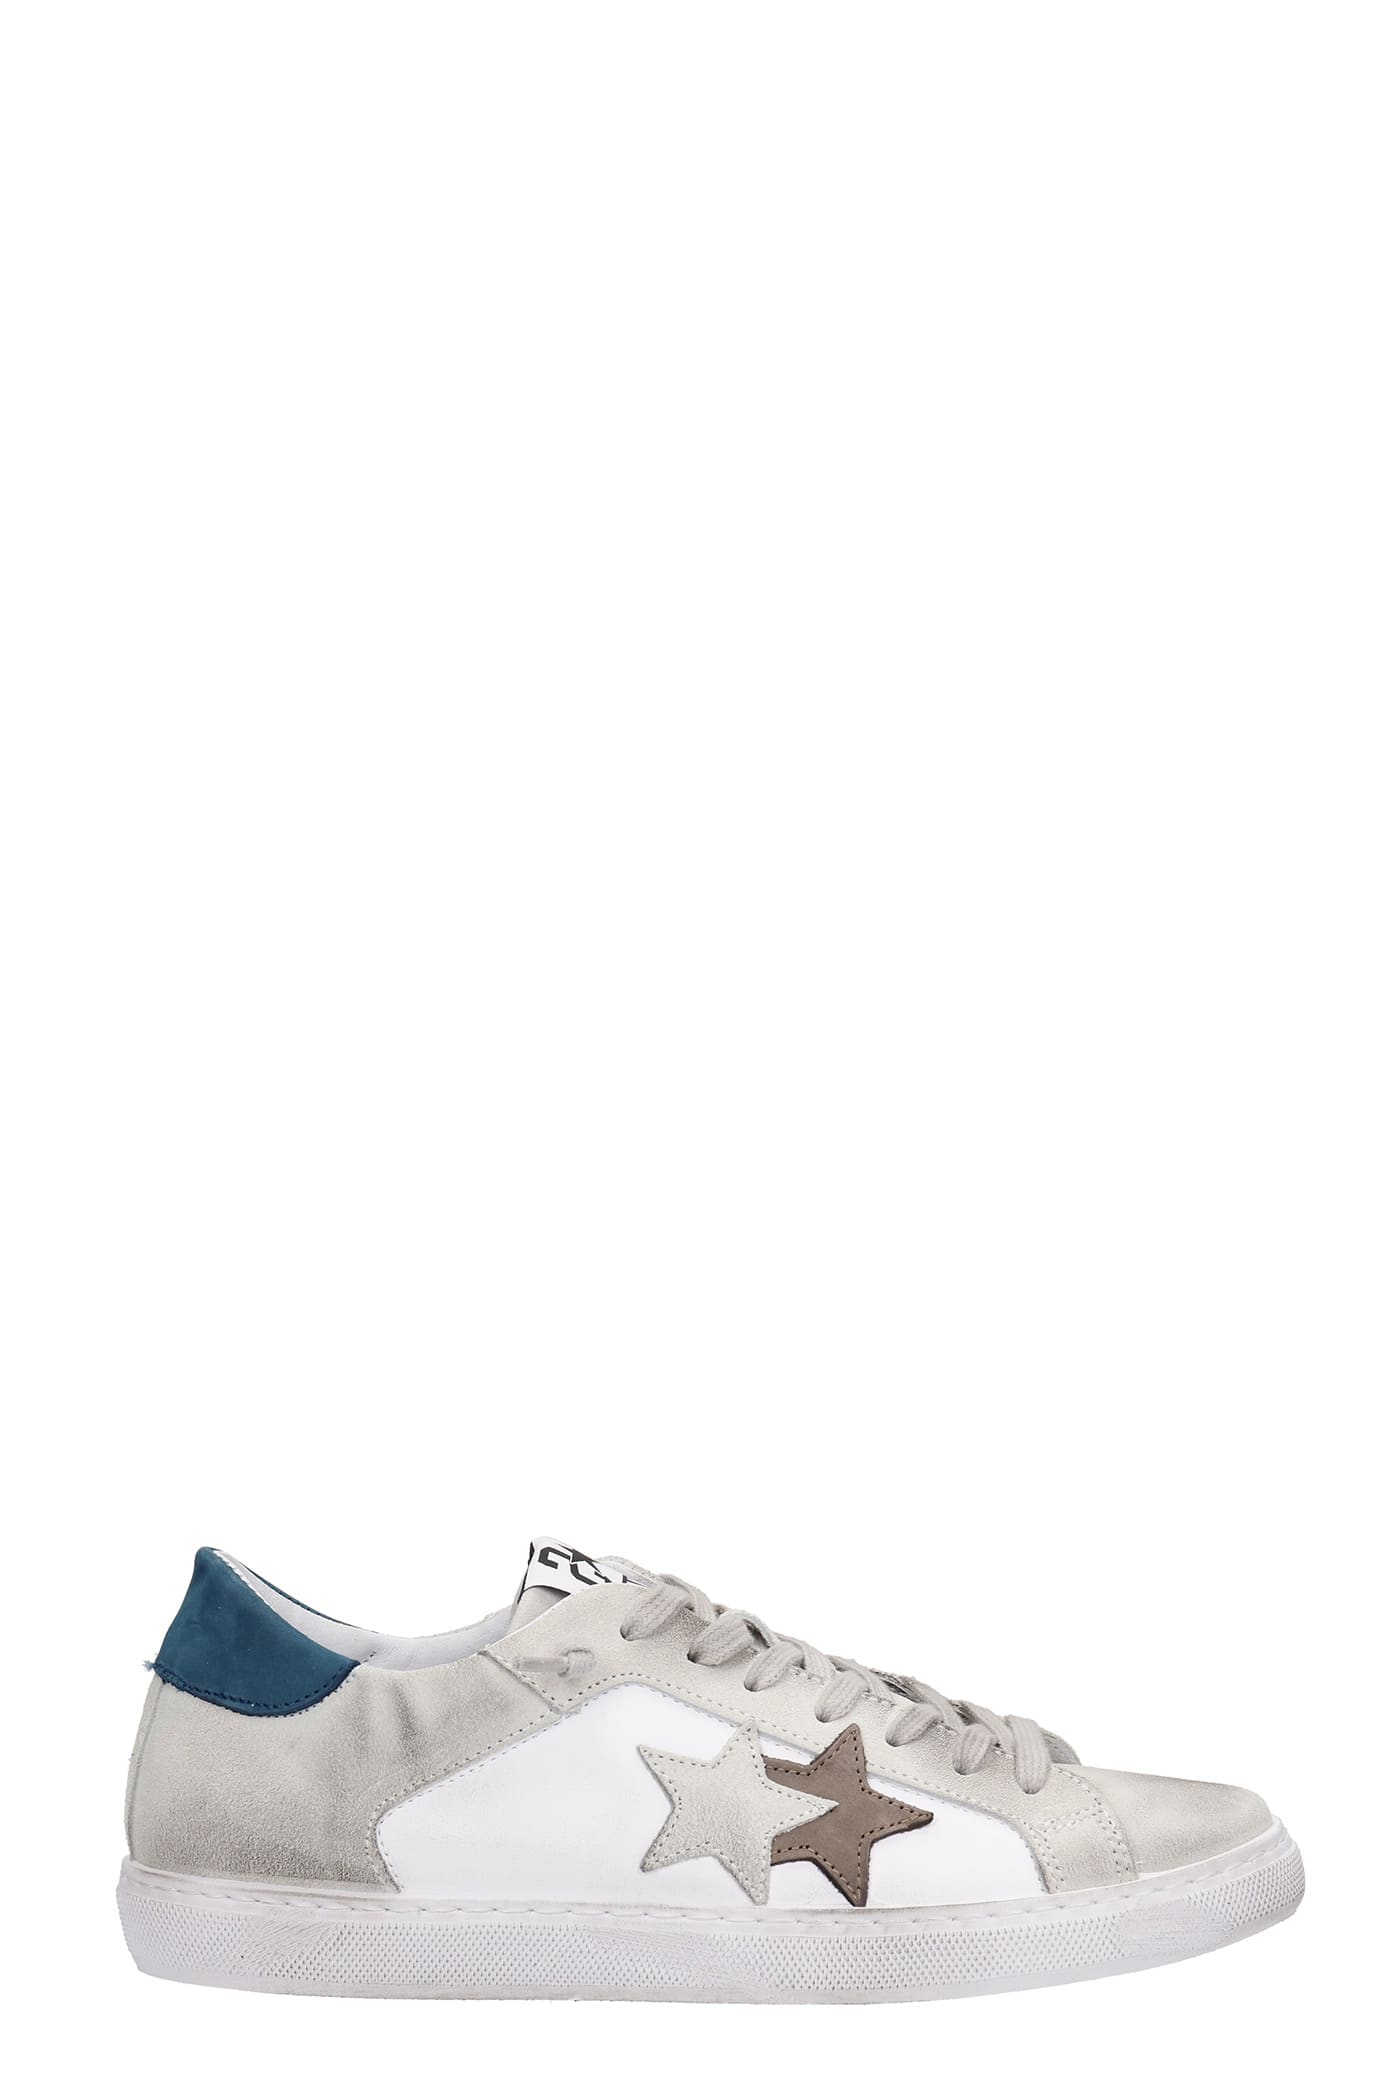 2Star Low Star Sneakers In White Suede And Leather